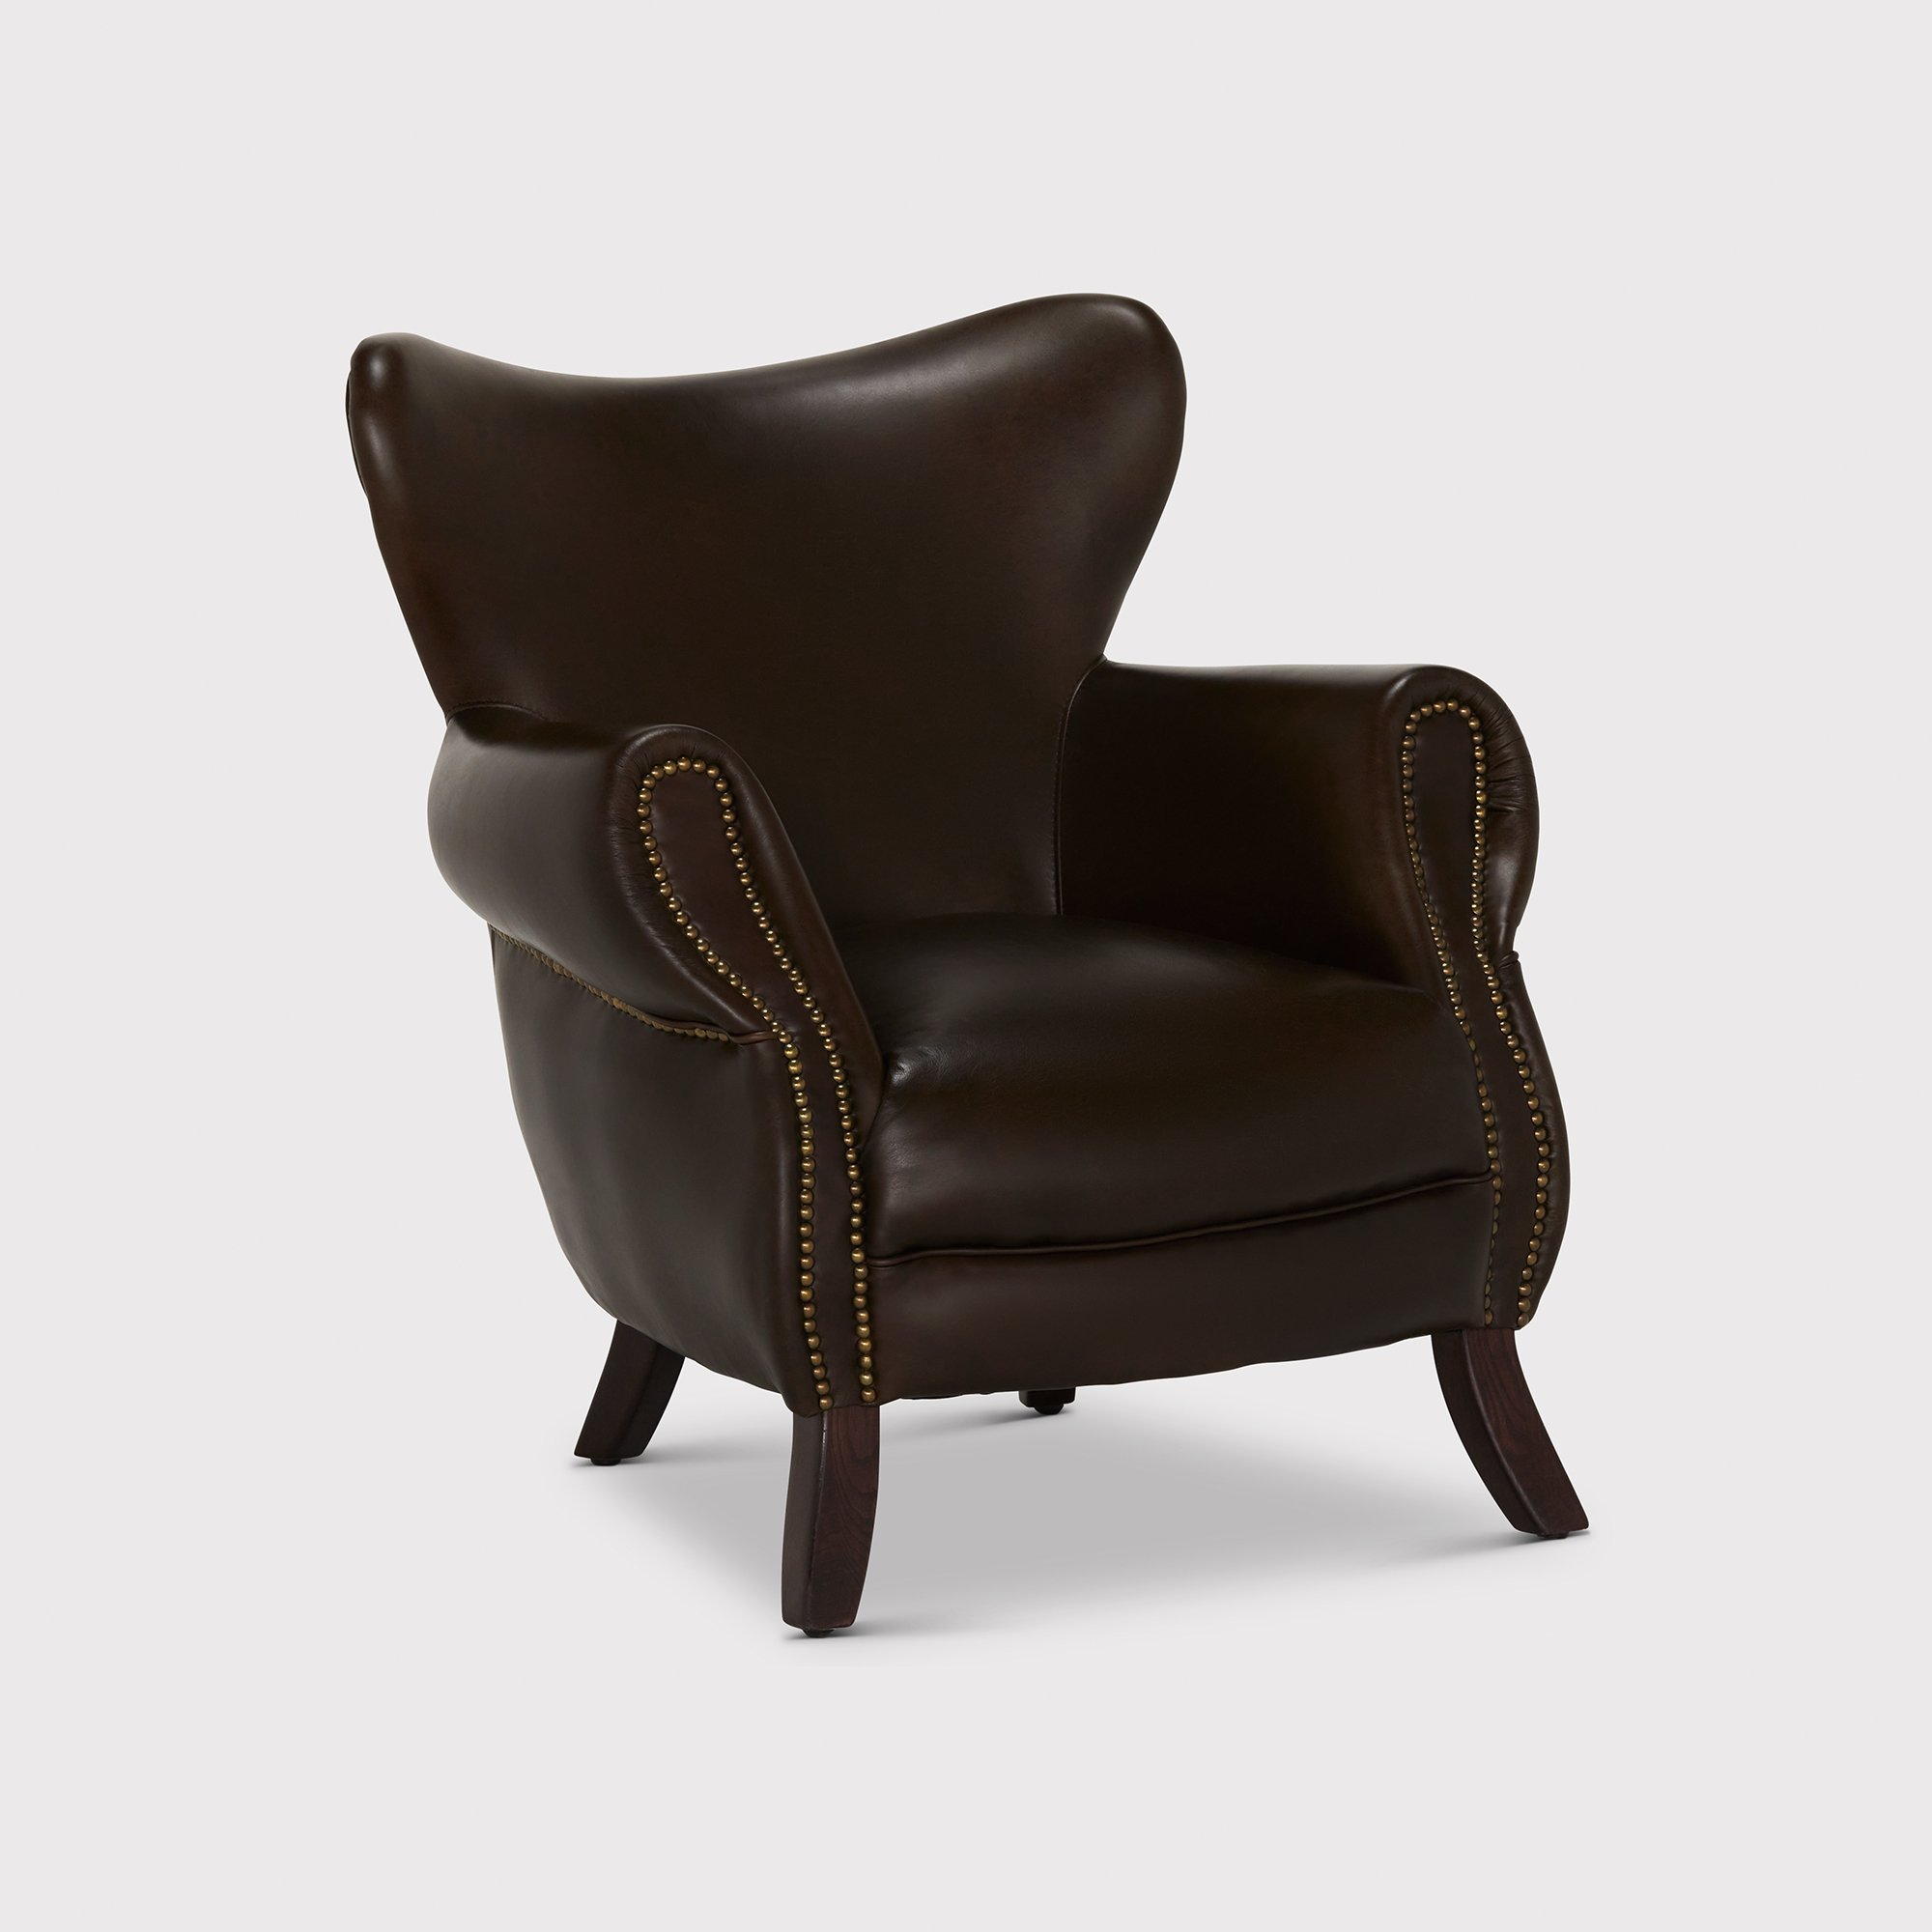 Photo of Timothy oulton scholar armchair in brown